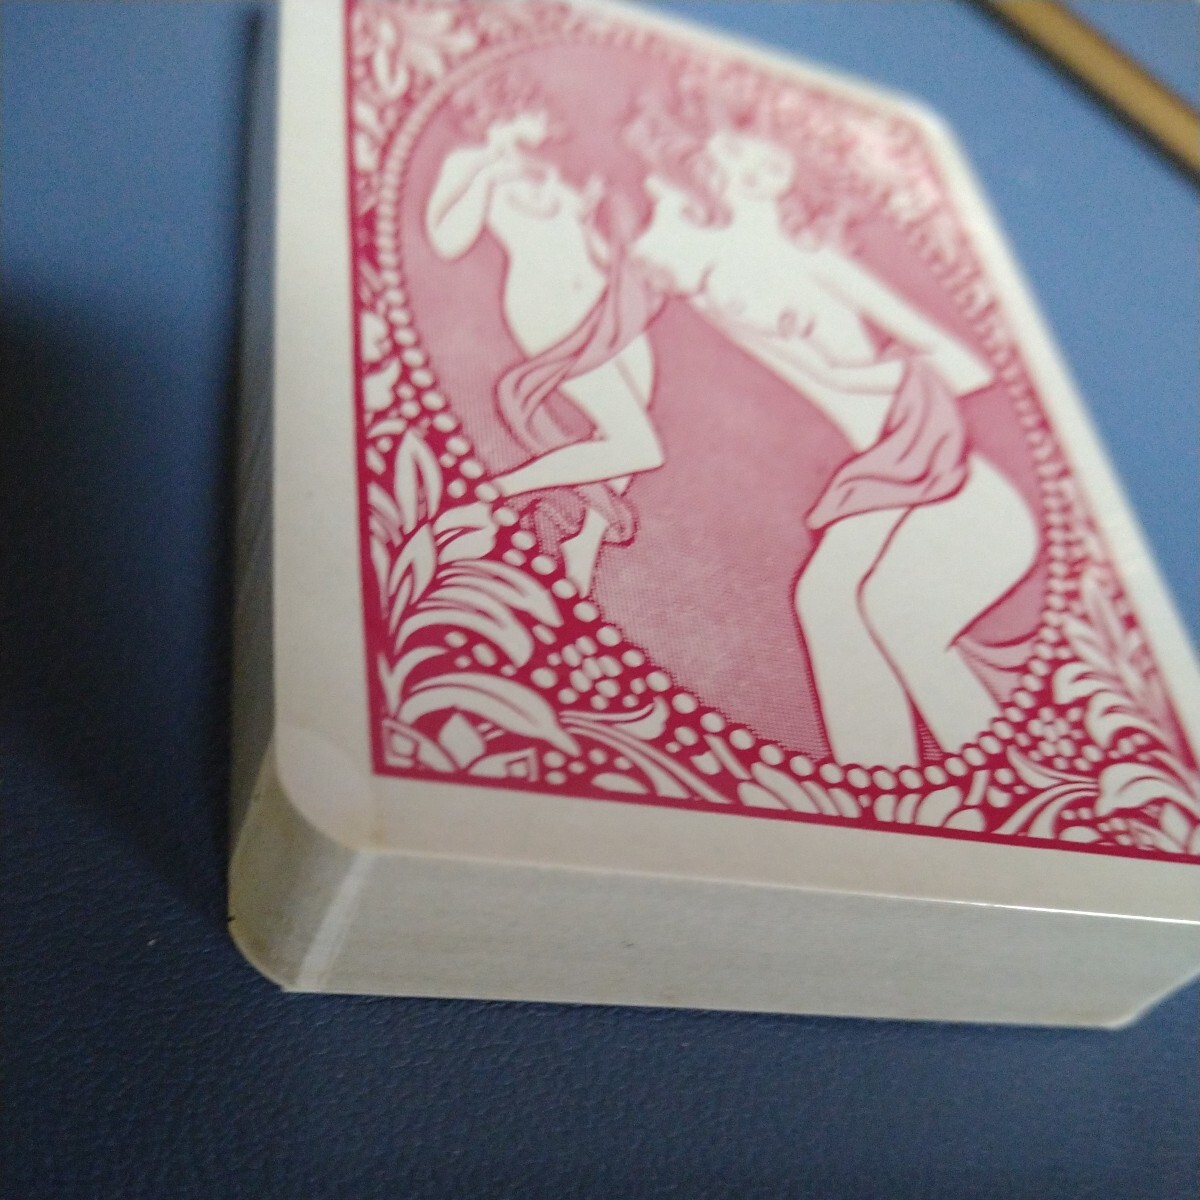 54 Different Beautiful Girls Plastic Coated Playing Cards ヌードトランプ 未開封の画像4